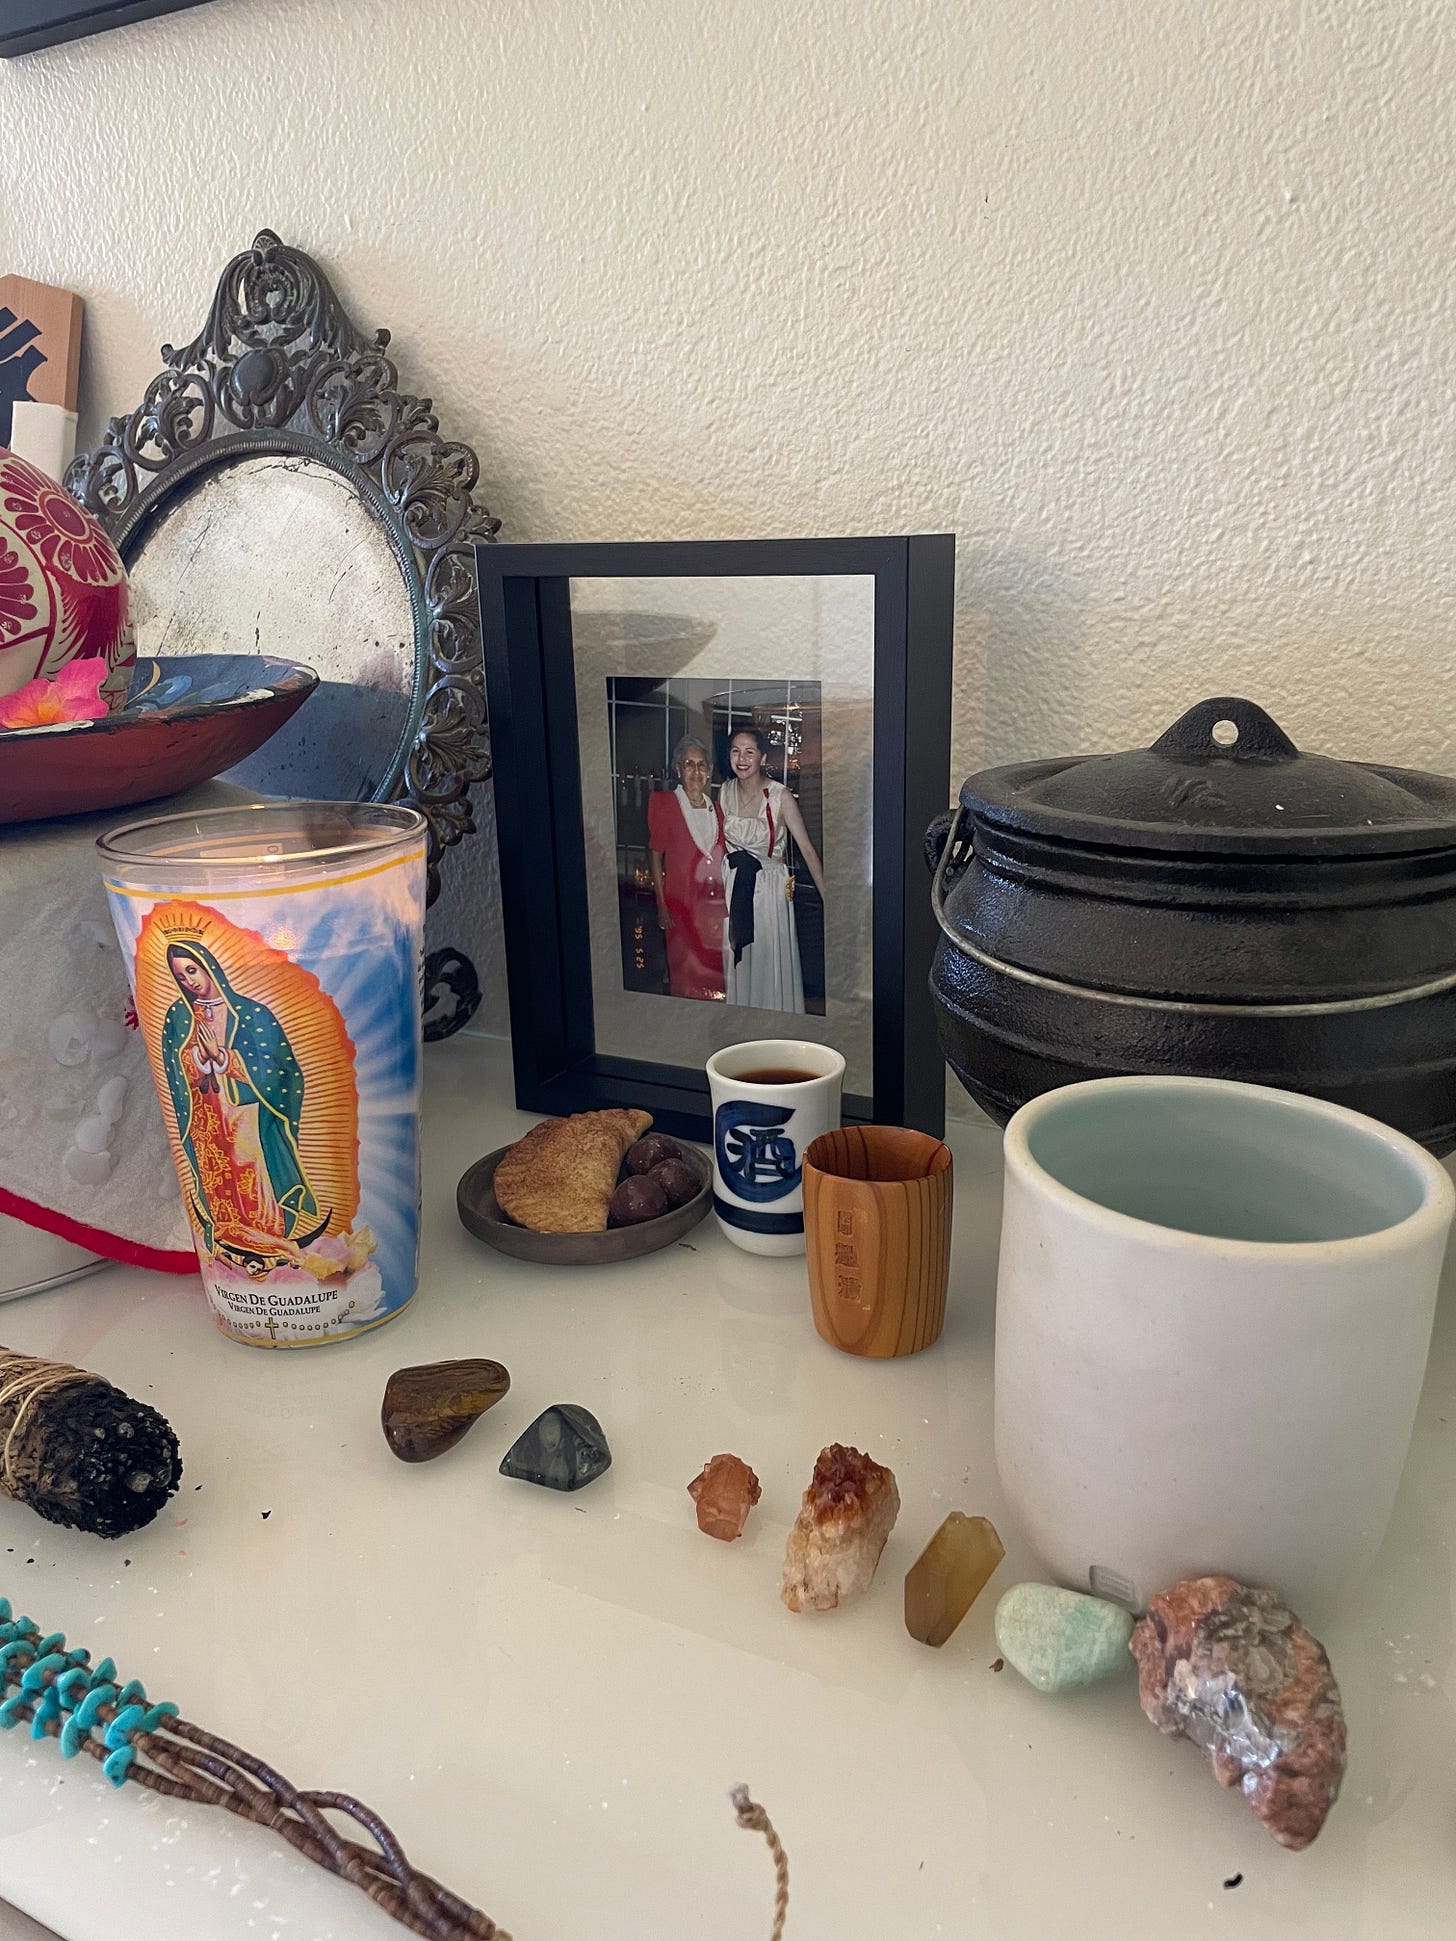 an up-close detail of home altar with a family photograph, small containers with liquids, and small amounts of food